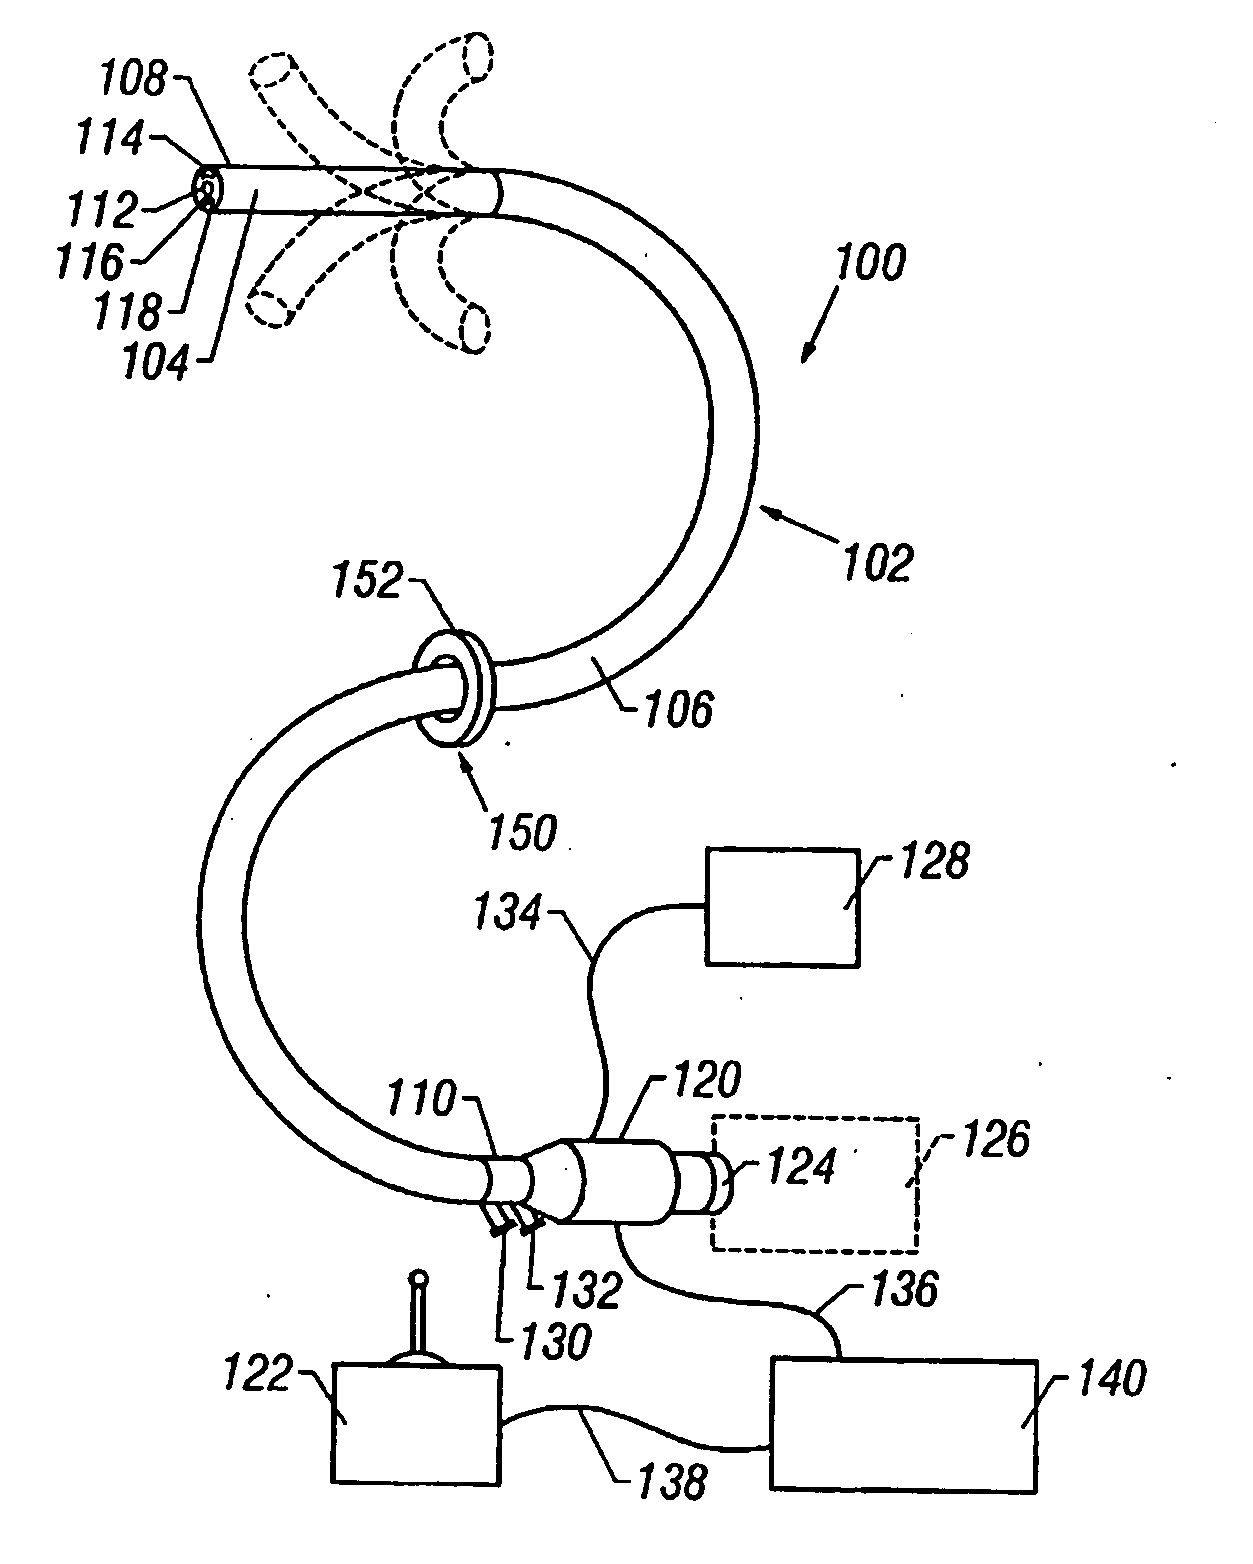 Methods and apparatus for accessing and treating regions of the body